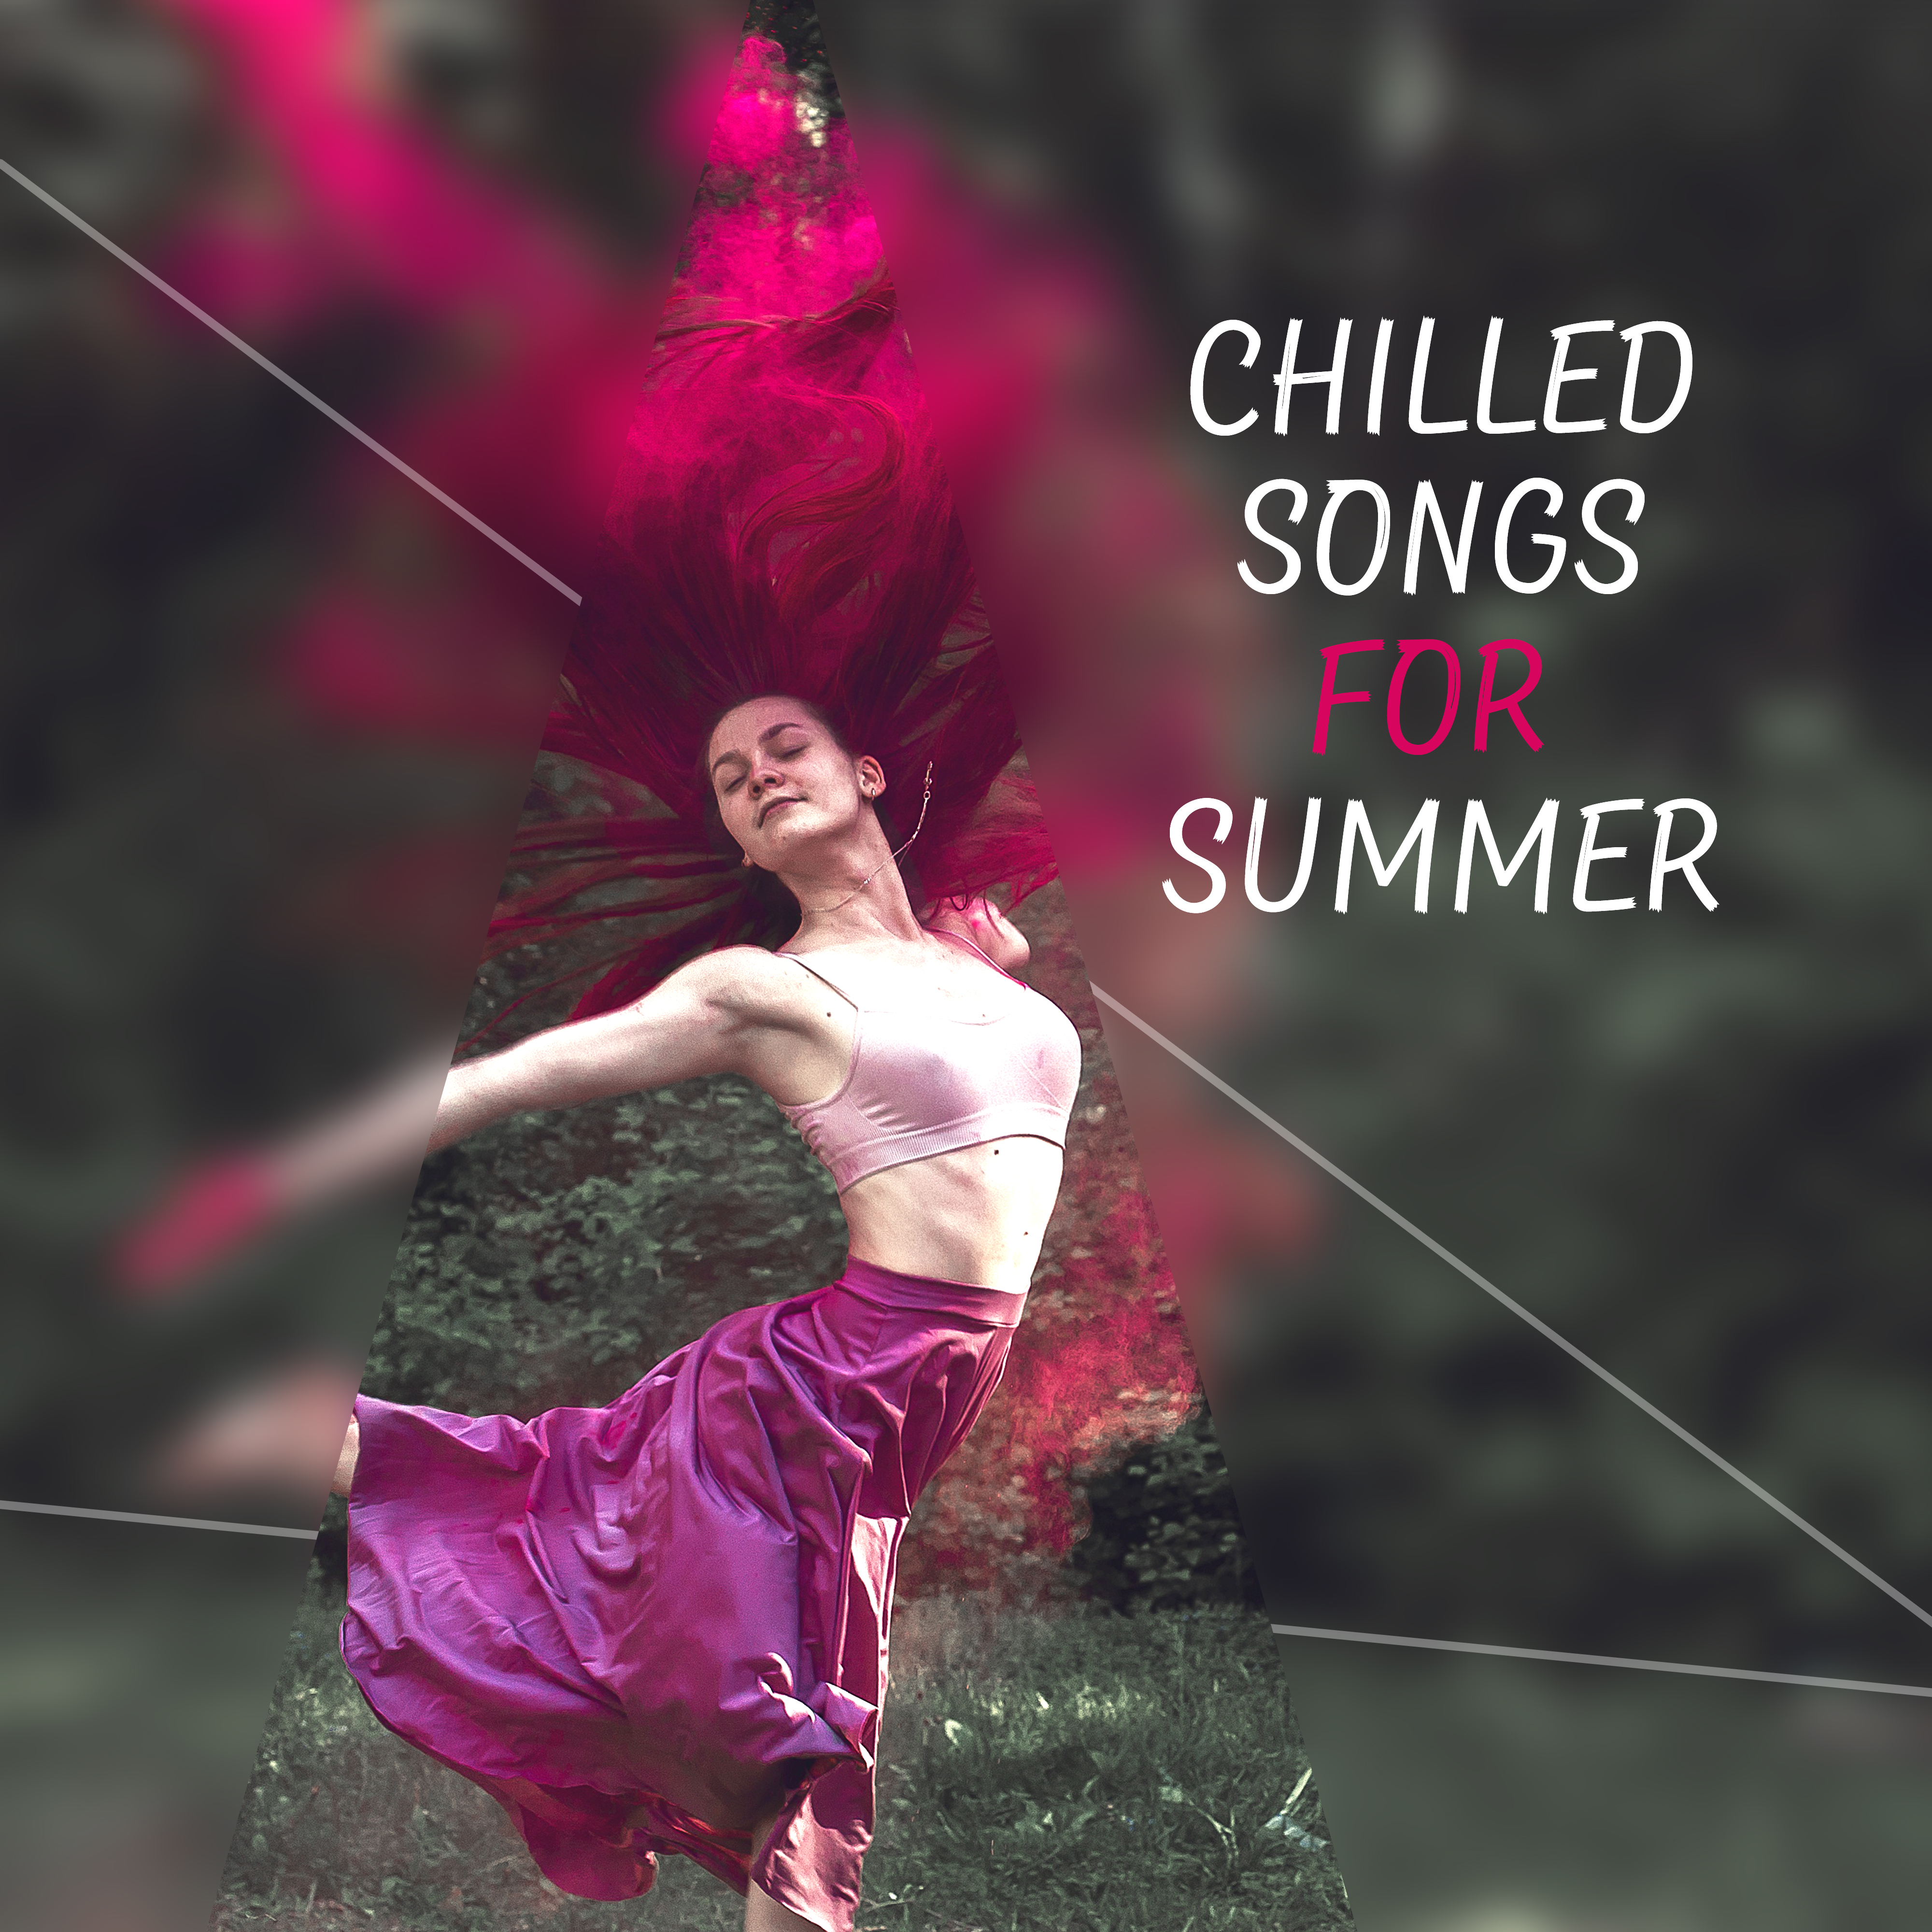 Chilled Songs for Summer – Peaceful Beach Music, Stress Relief, Easy Listening, Calm Down & Relax